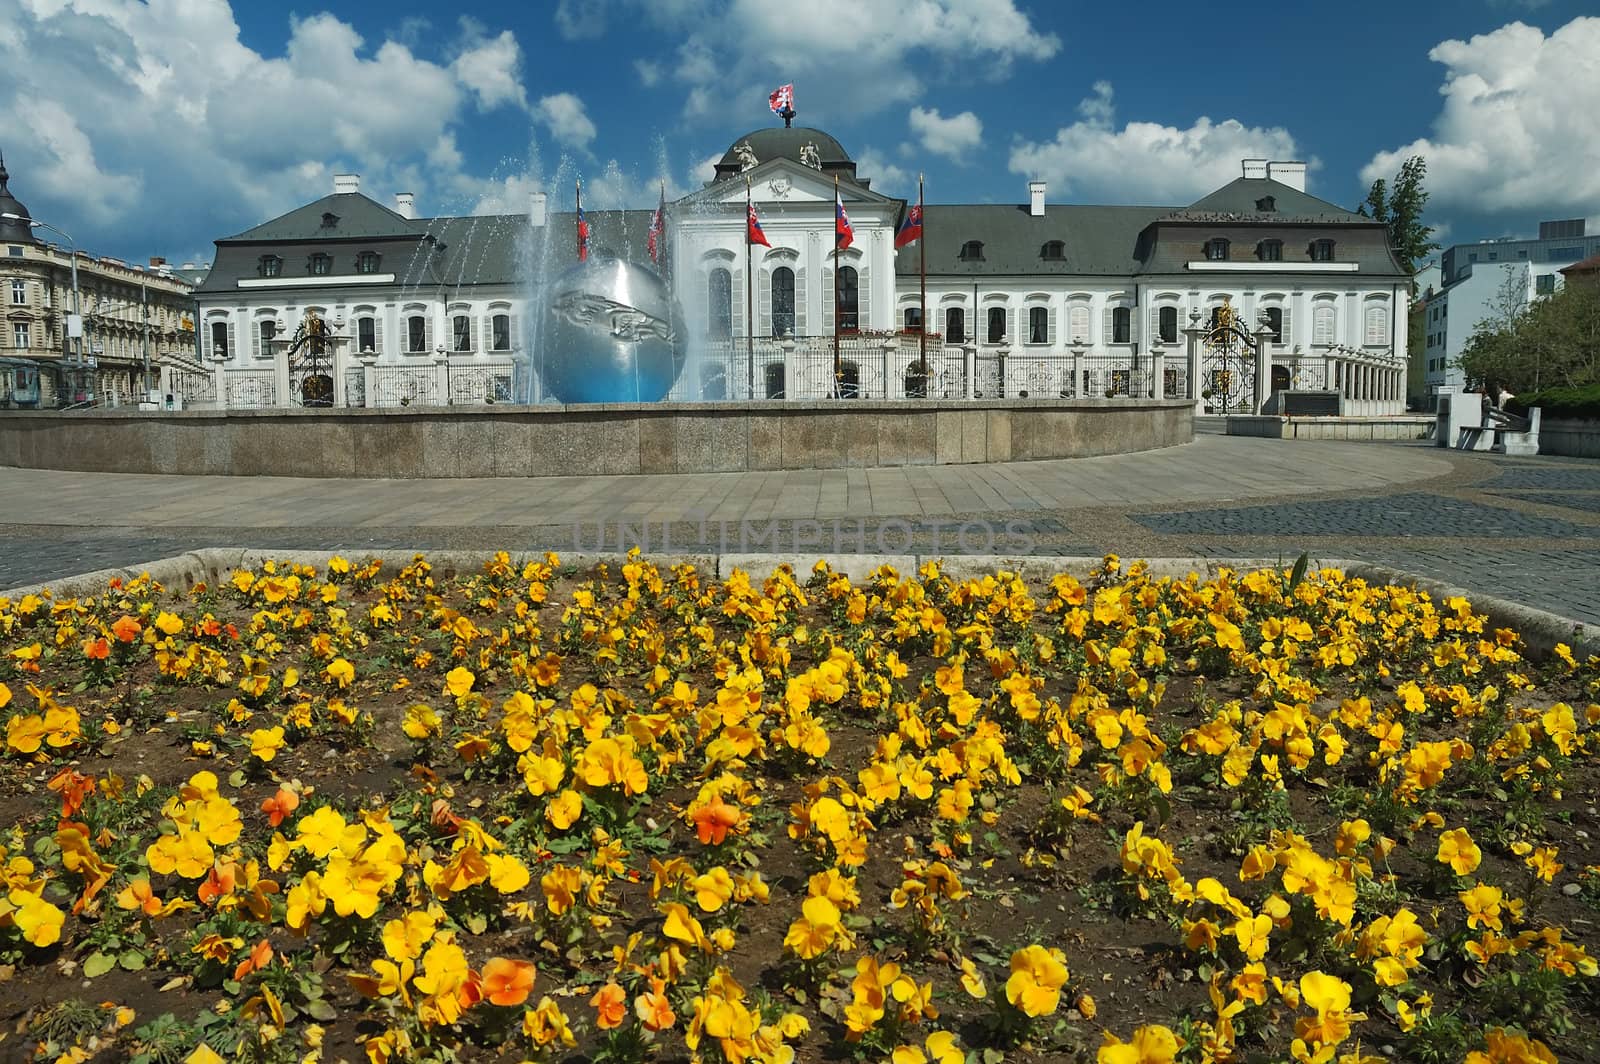 Grassalkovichov palace. yellow flowers in foreground, nice sunny day